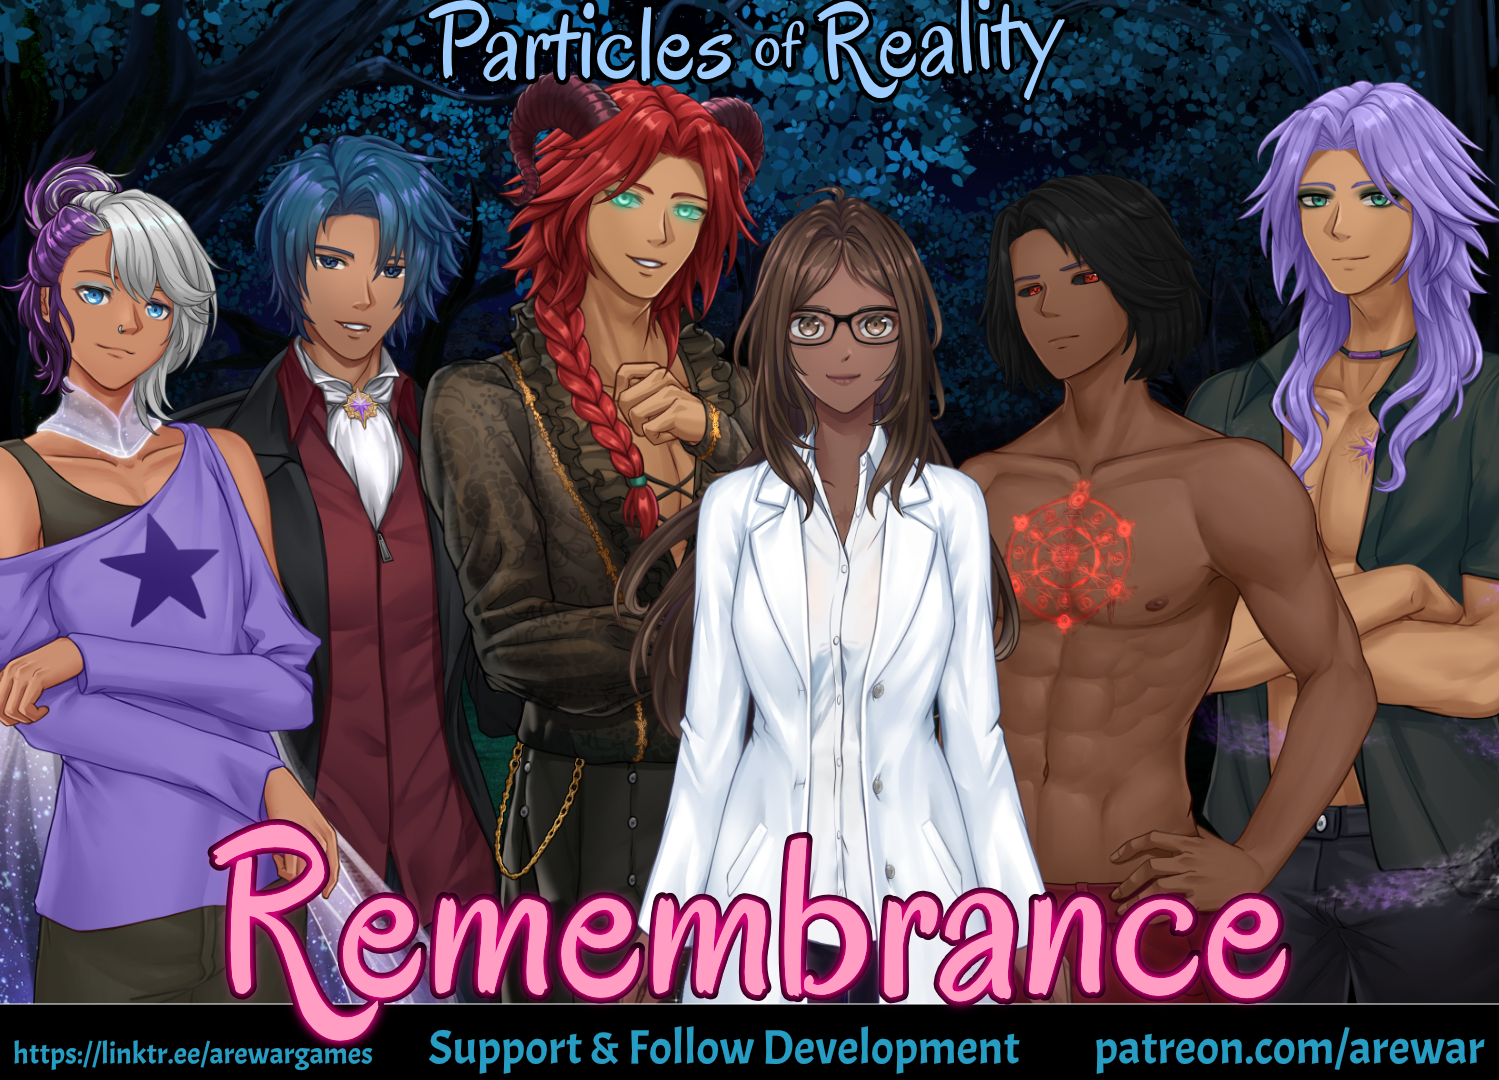 Particles of Reality: Remembrance